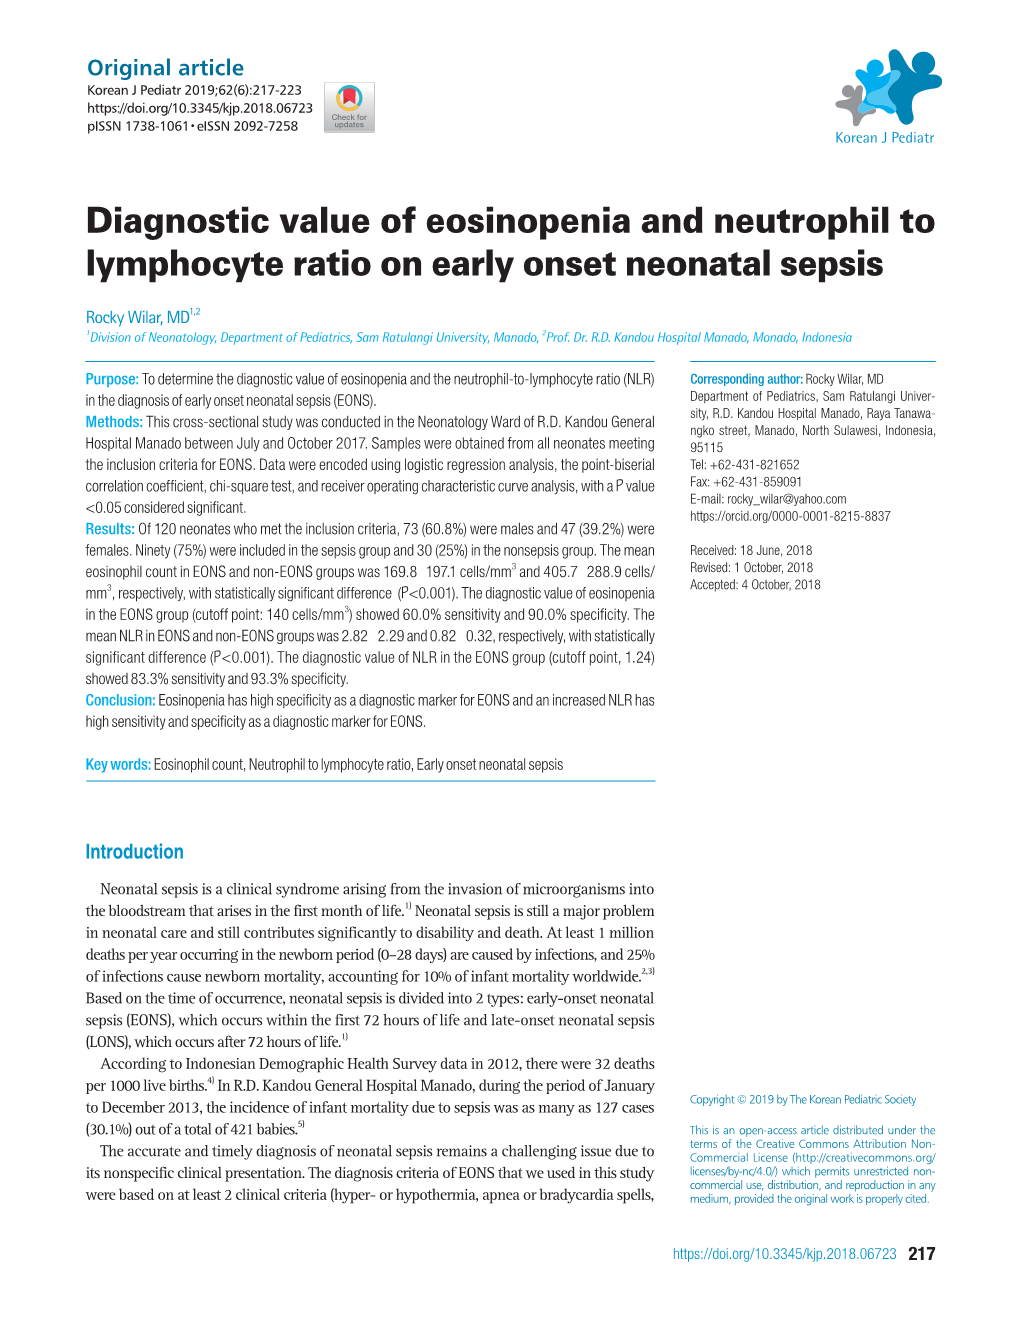 Diagnostic Value of Eosinopenia and Neutrophil to Lymphocyte Ratio on Early Onset Neonatal Sepsis